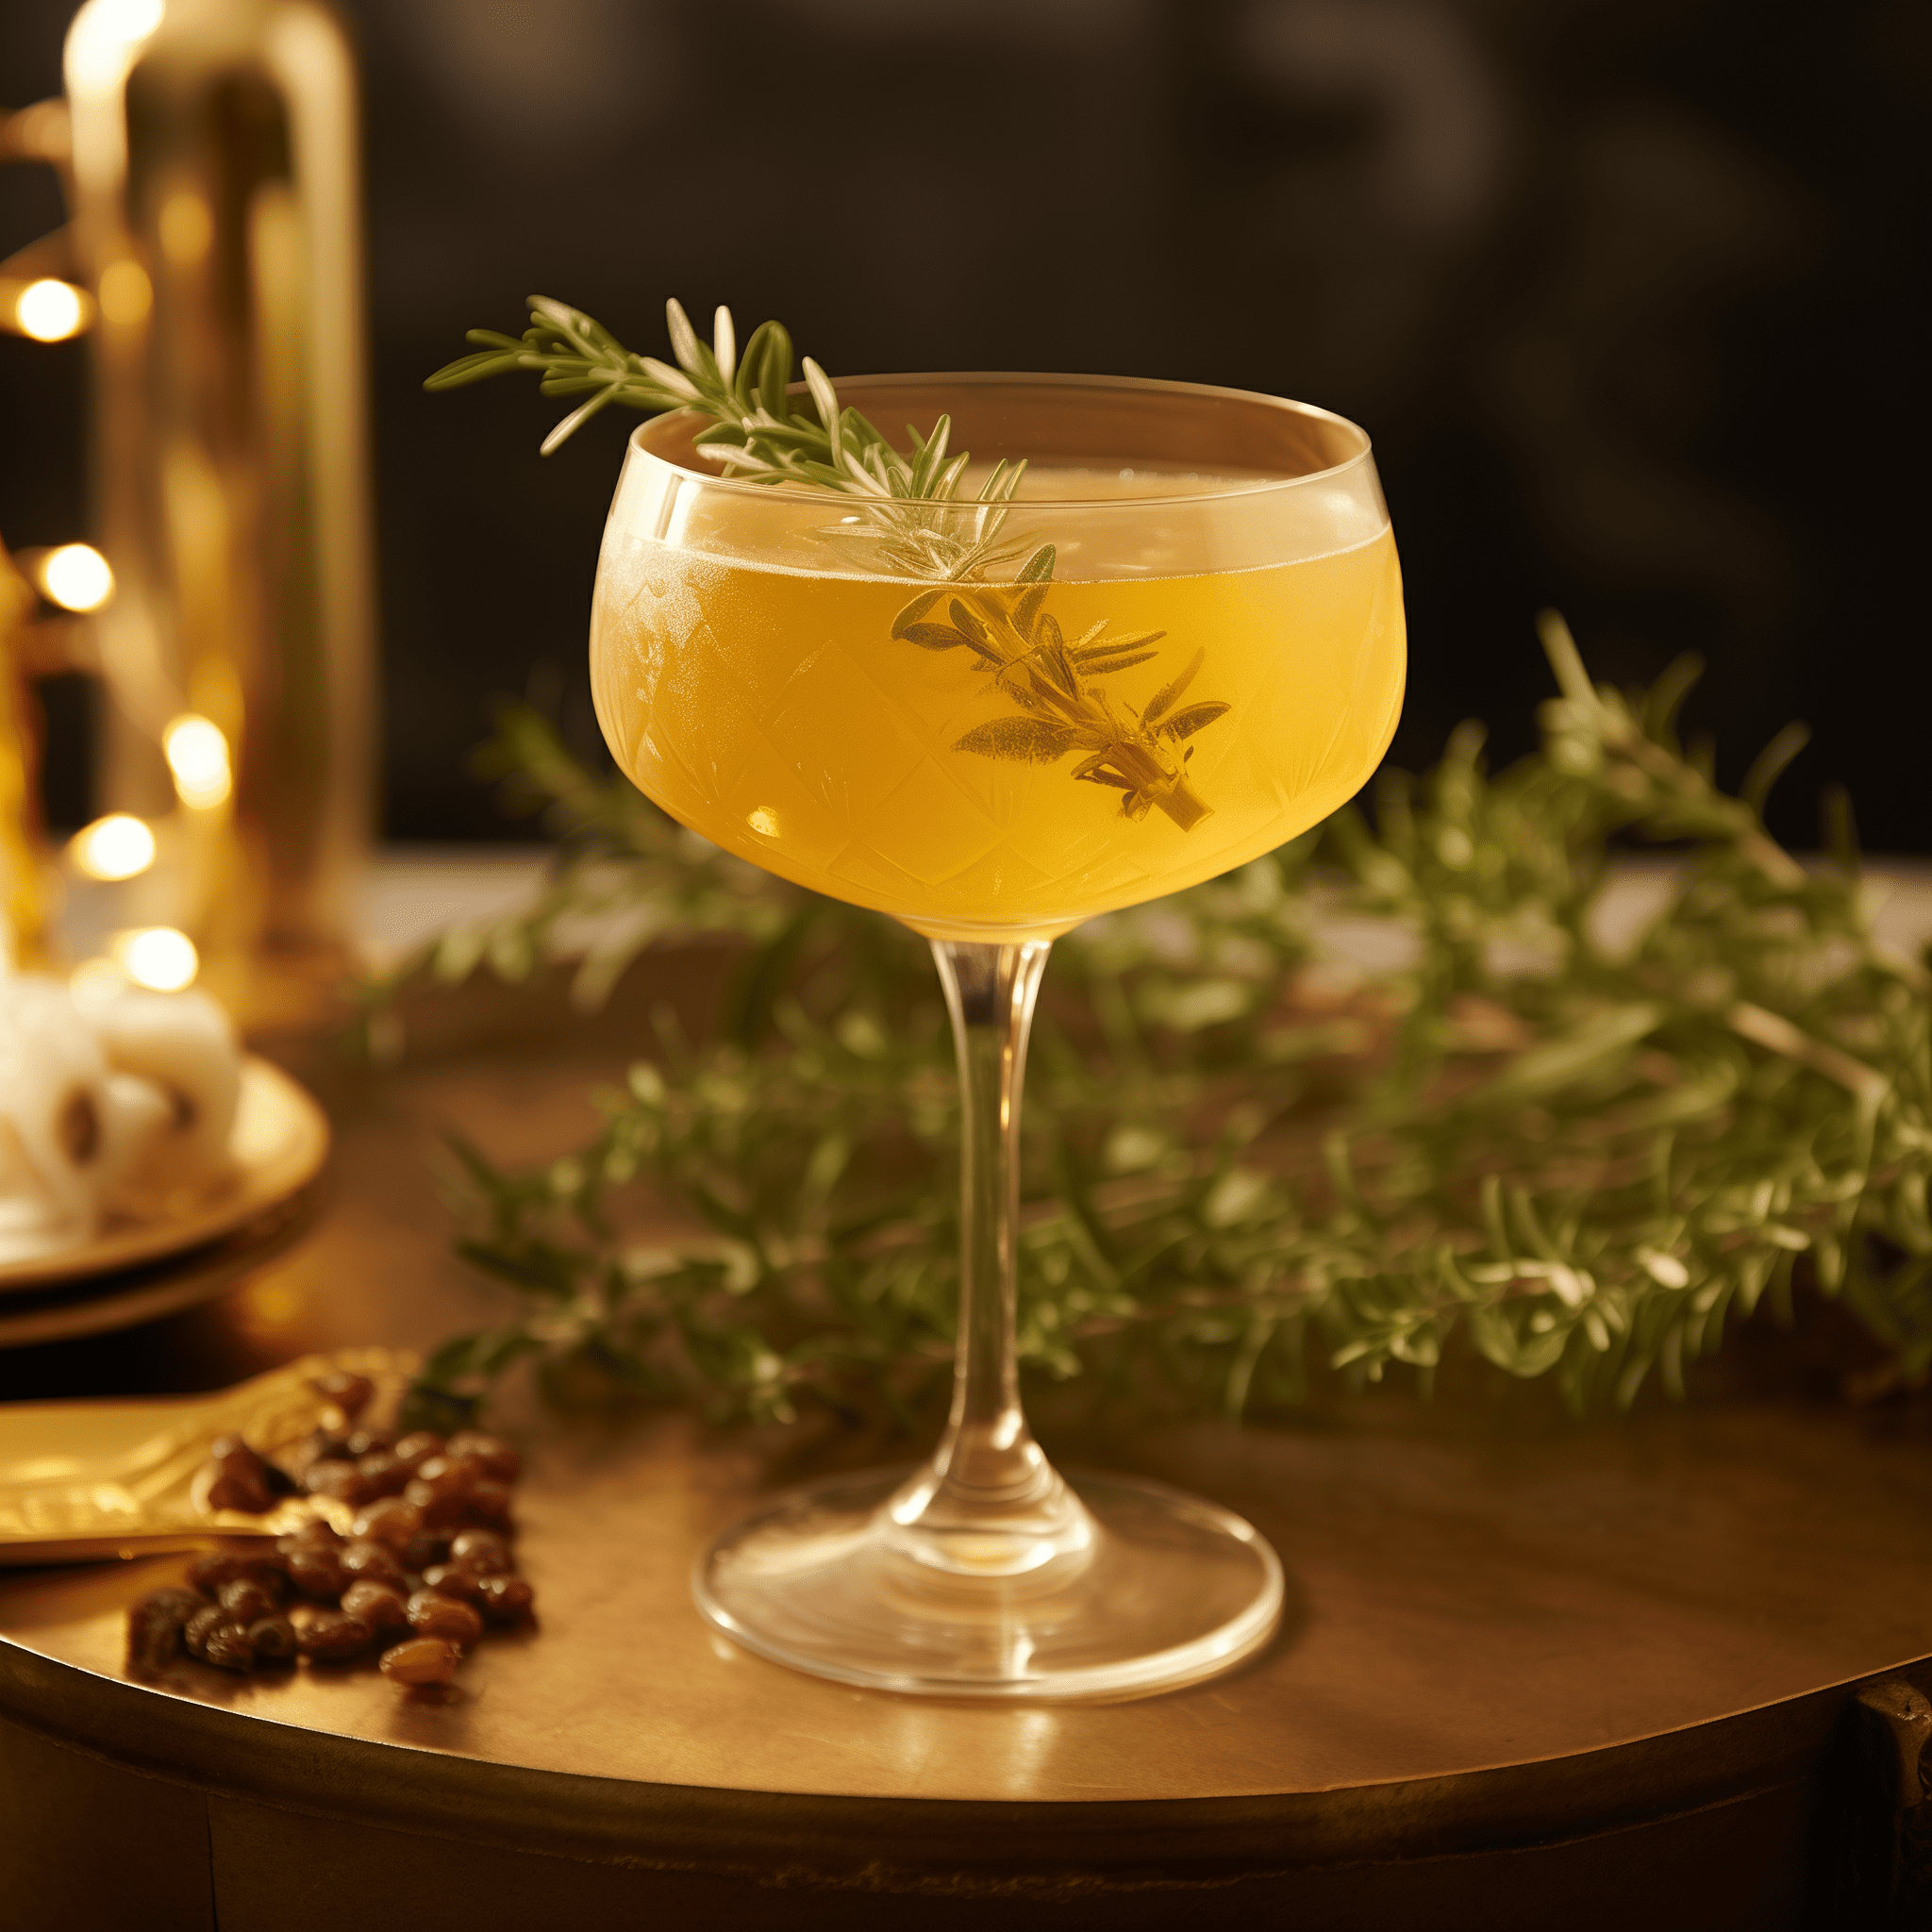 French Harvest Cocktail Recipe - The French Harvest cocktail offers a harmonious blend of sweet and tart flavors, with a robust body and a smooth finish. The apple brandy base provides a warm, fruity undertone, while the herbal notes of thyme and the tartness of lemon add complexity.